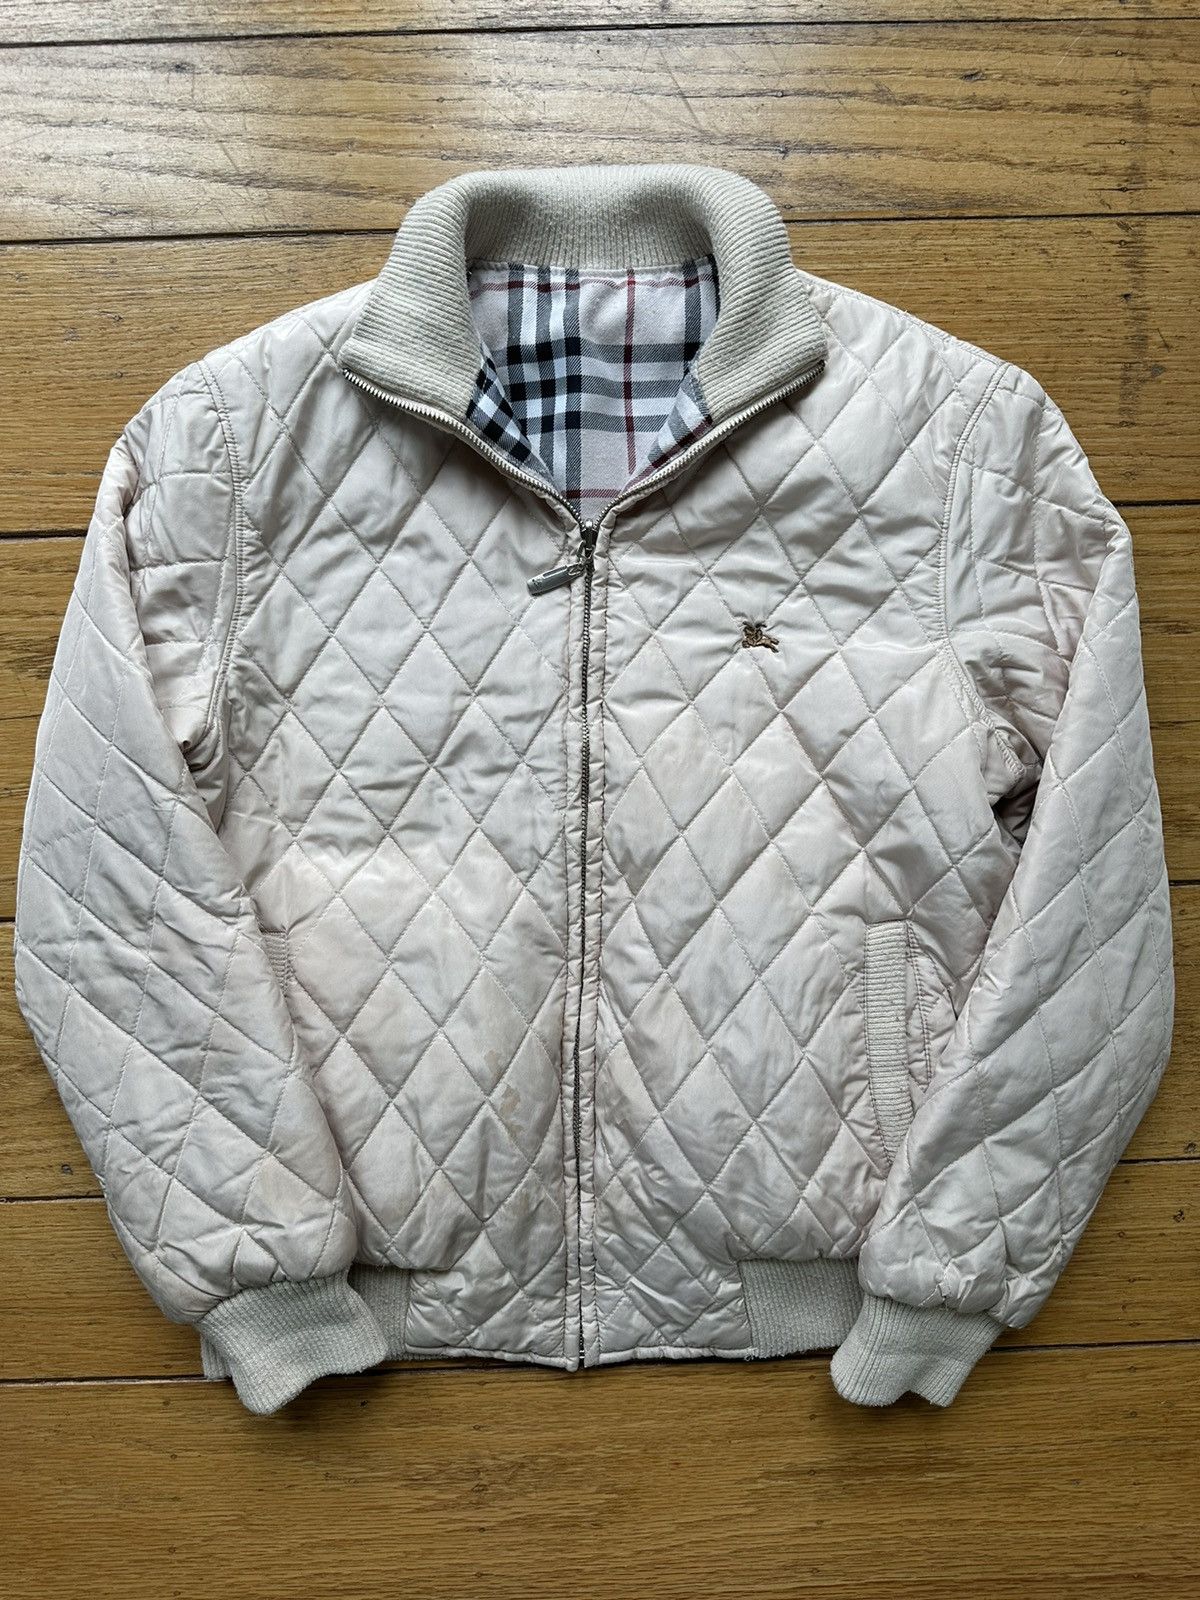 Burberry Burberry Reversible Quilted Bomber Jacket Size M / US 6-8 / IT 42-44 - 1 Preview